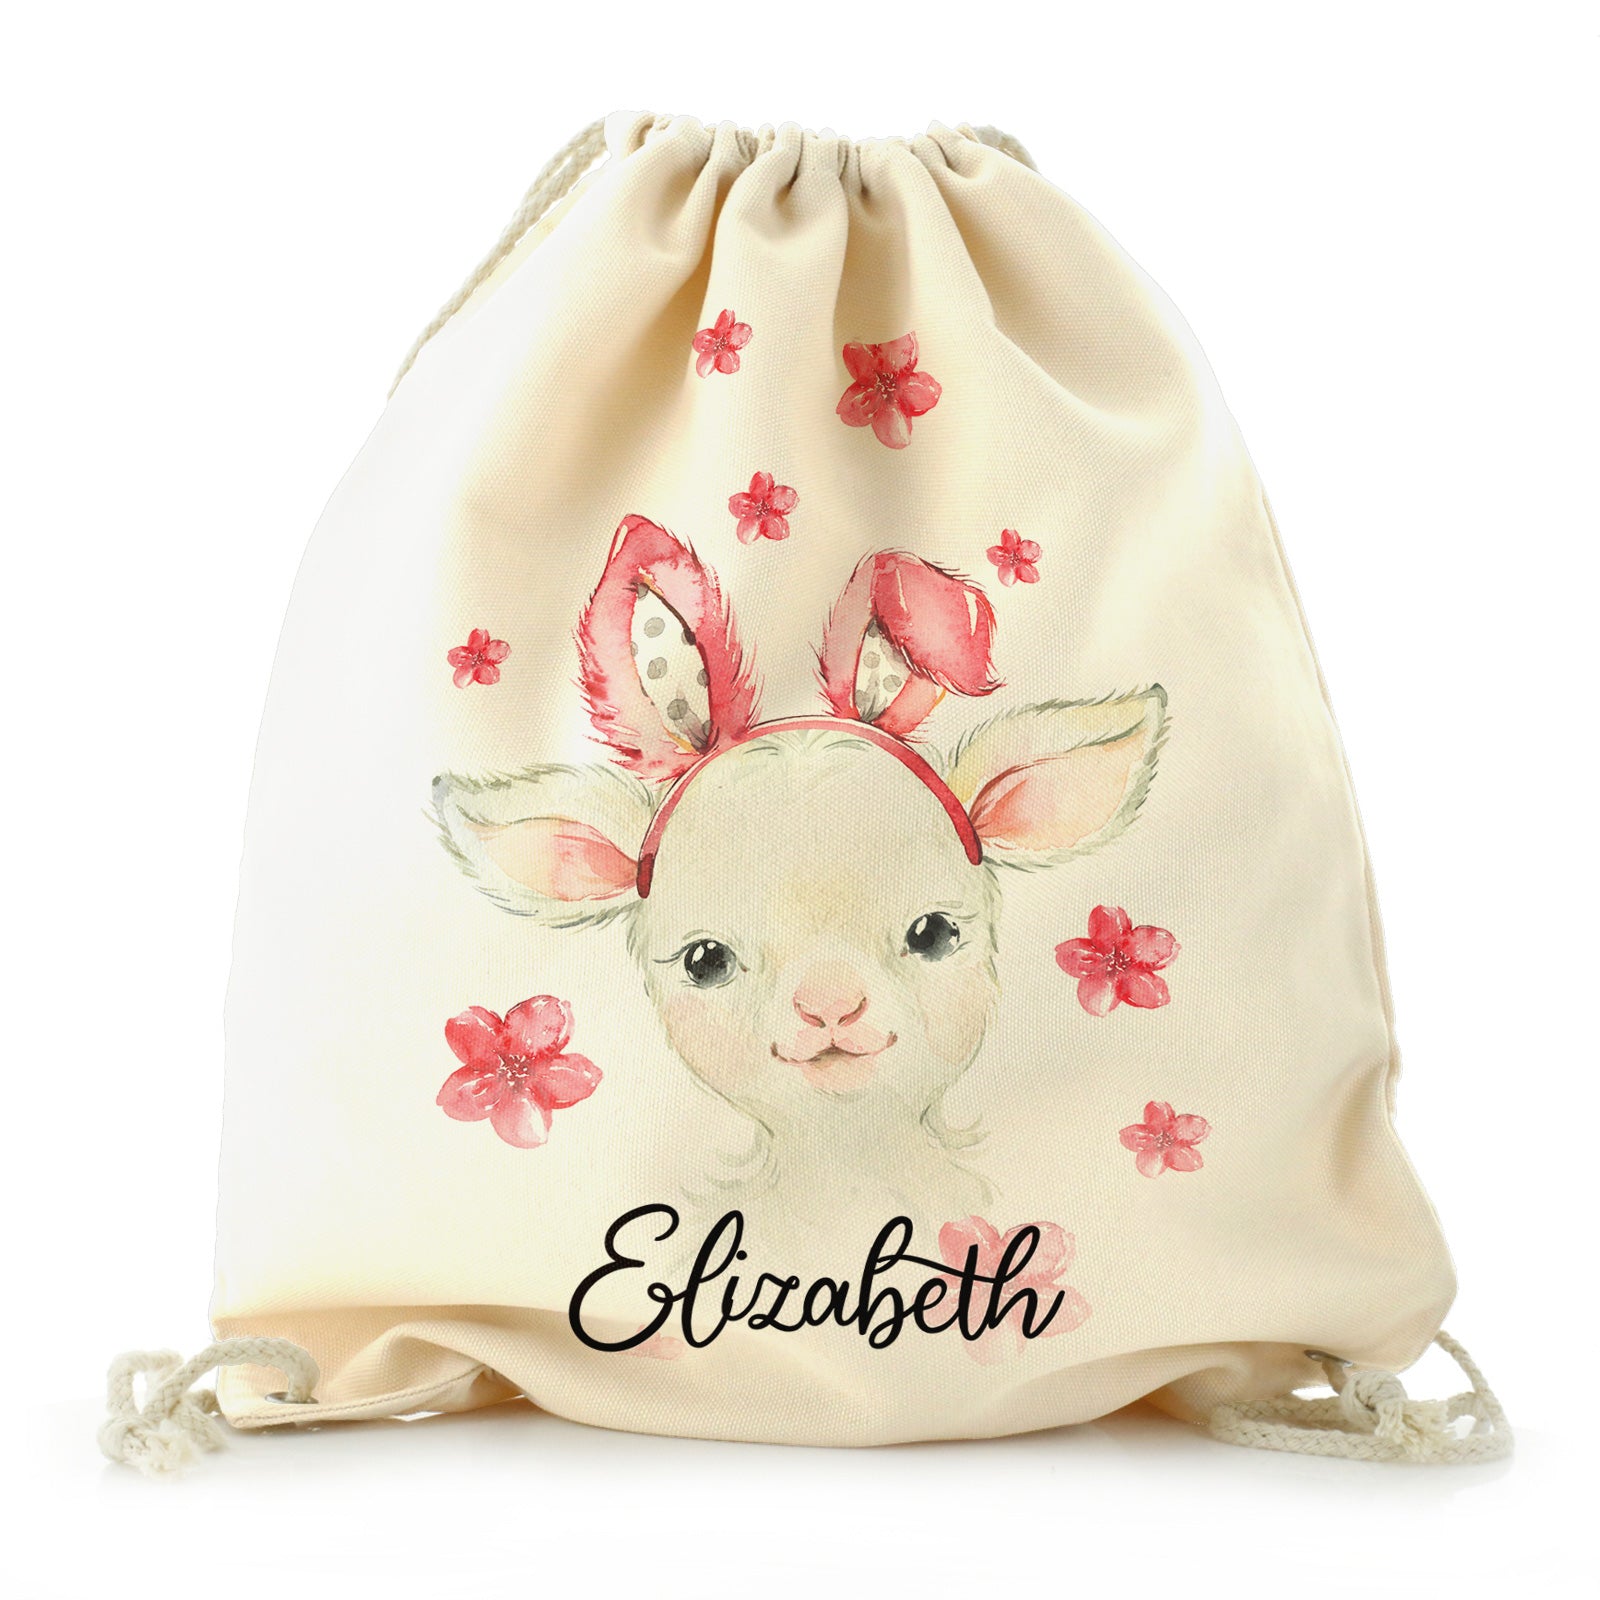 Personalised Canvas Drawstring Backpack with White Lamb Pink Bunny Ears and Flowers and Cute Text